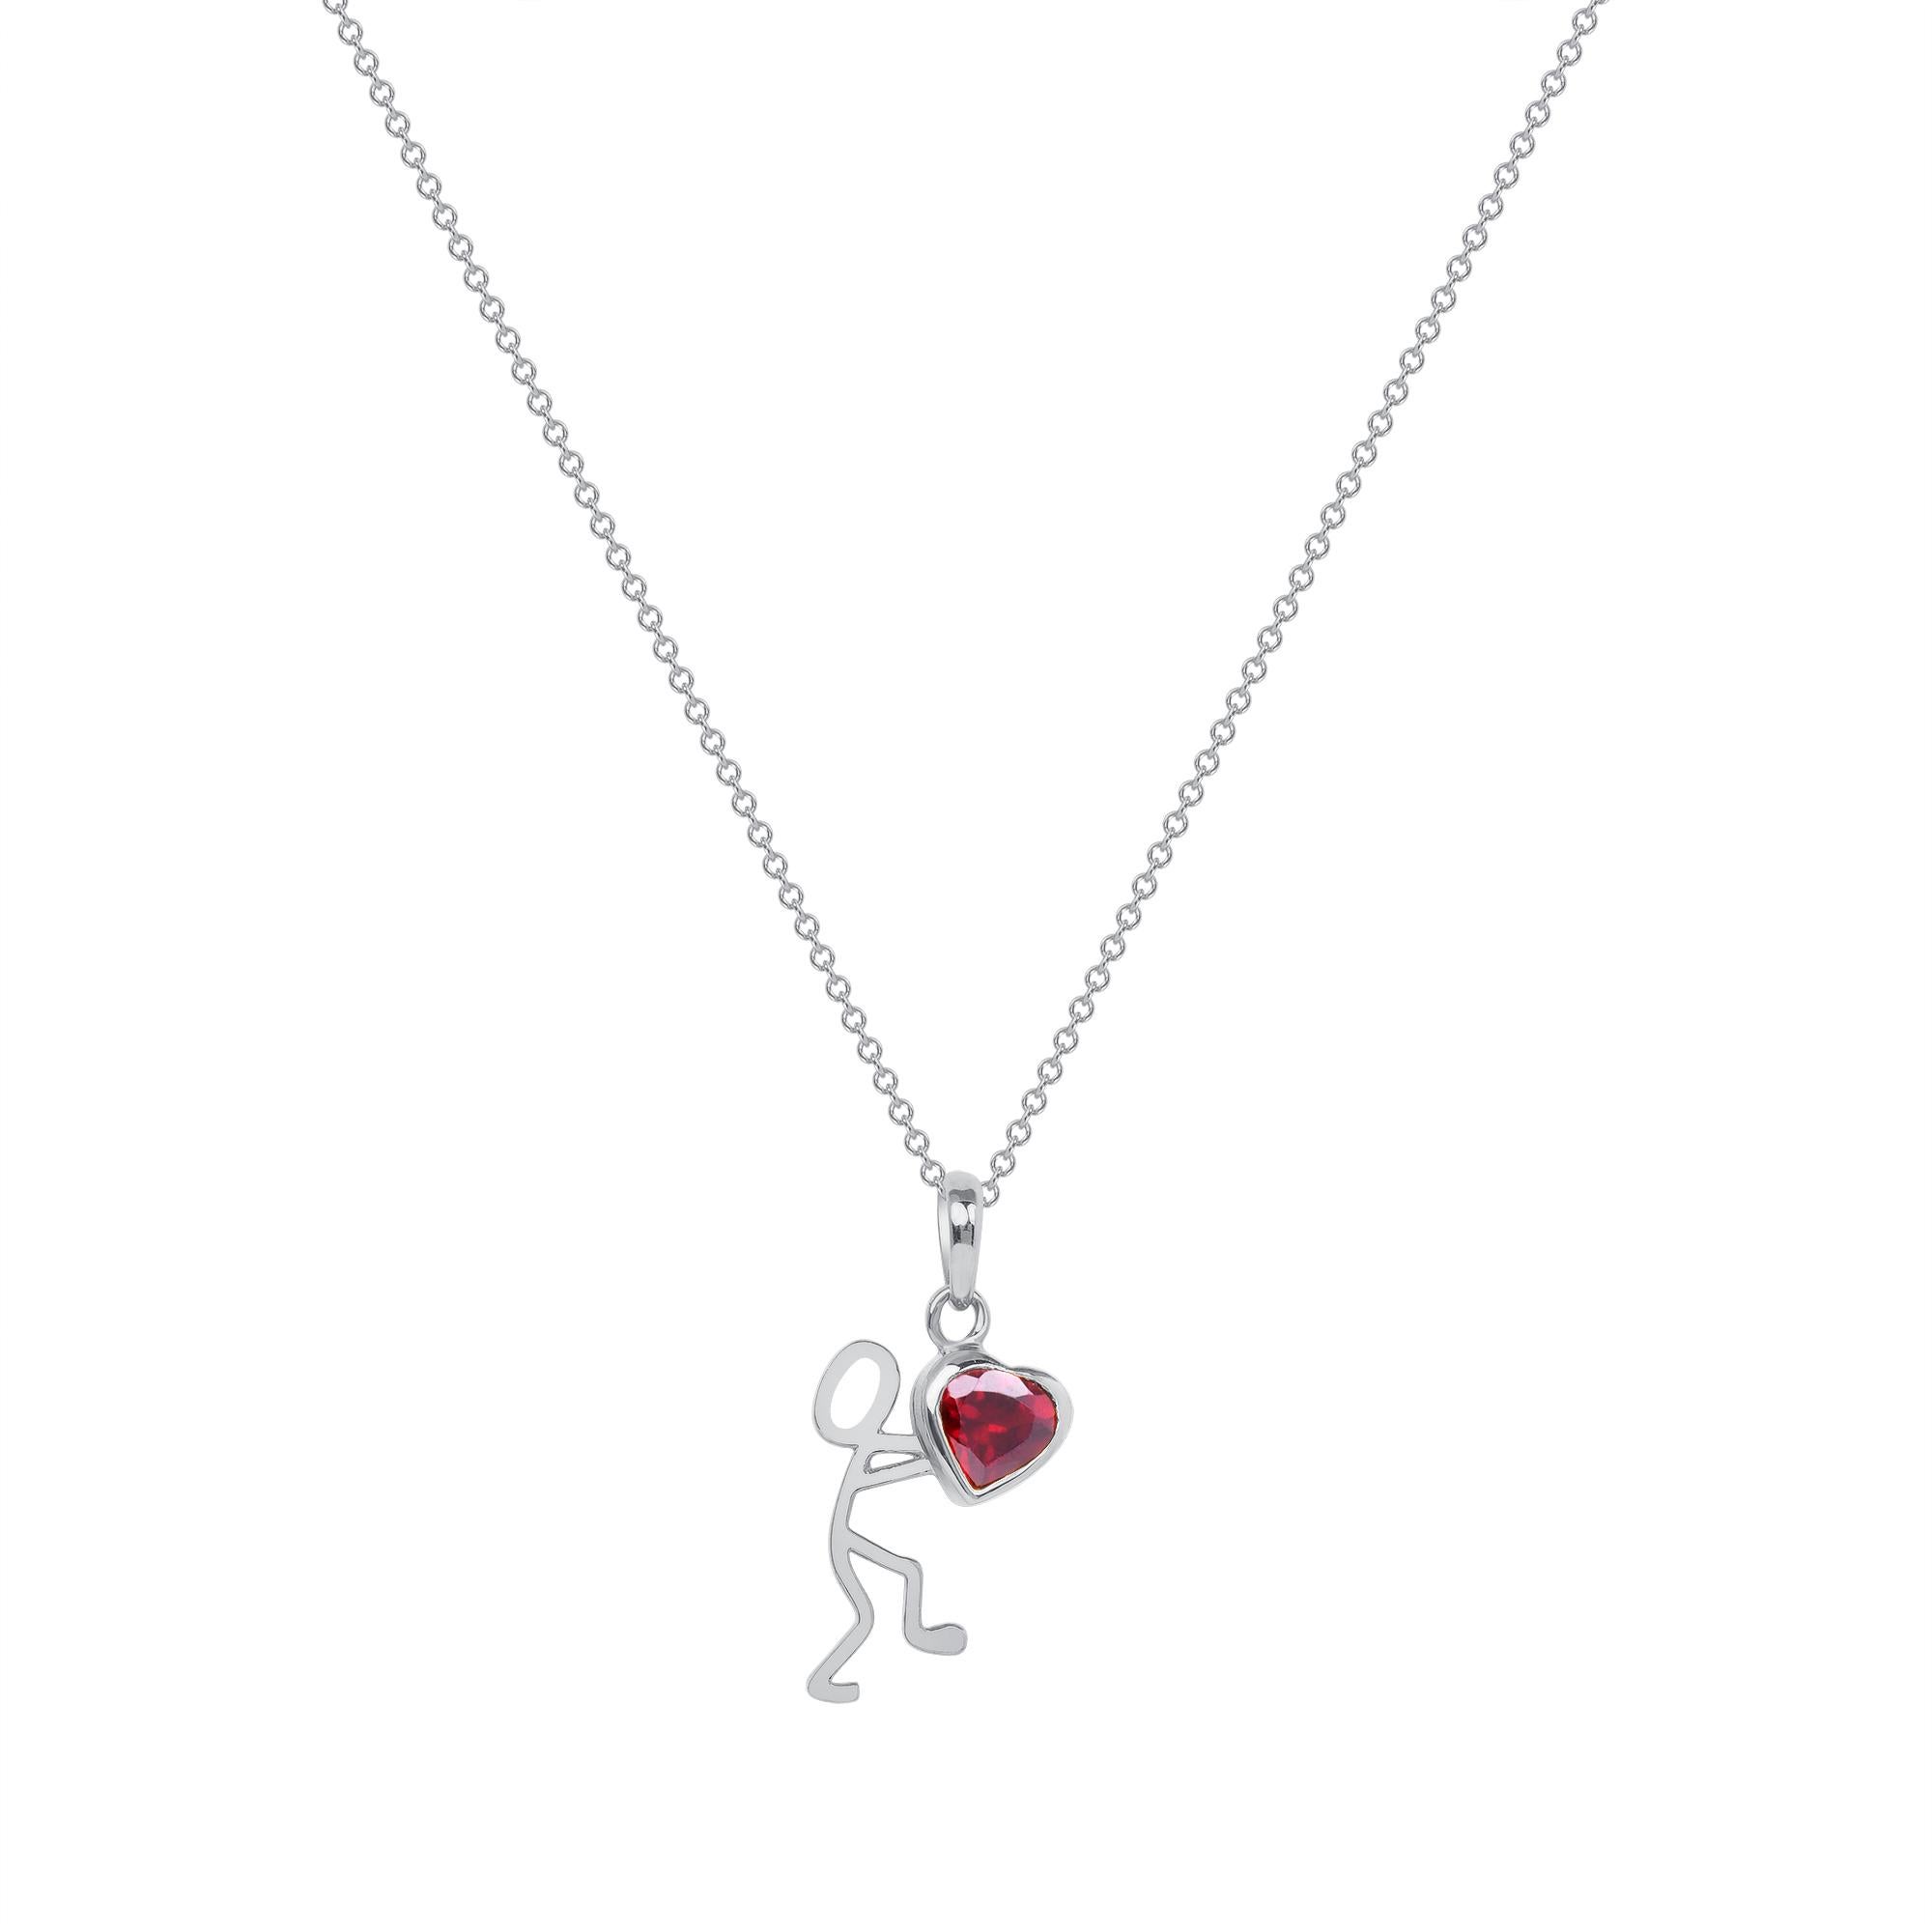 0.55 Carat Garnet Rhodium Plated Sterling Silver Stick Figure with Heart Pendant Necklace.

This pendant necklace was handmade with rhodium plated sterling silver. It features a 0.55-carat garnet. This pendant is on an 18-inch chain necklace with a